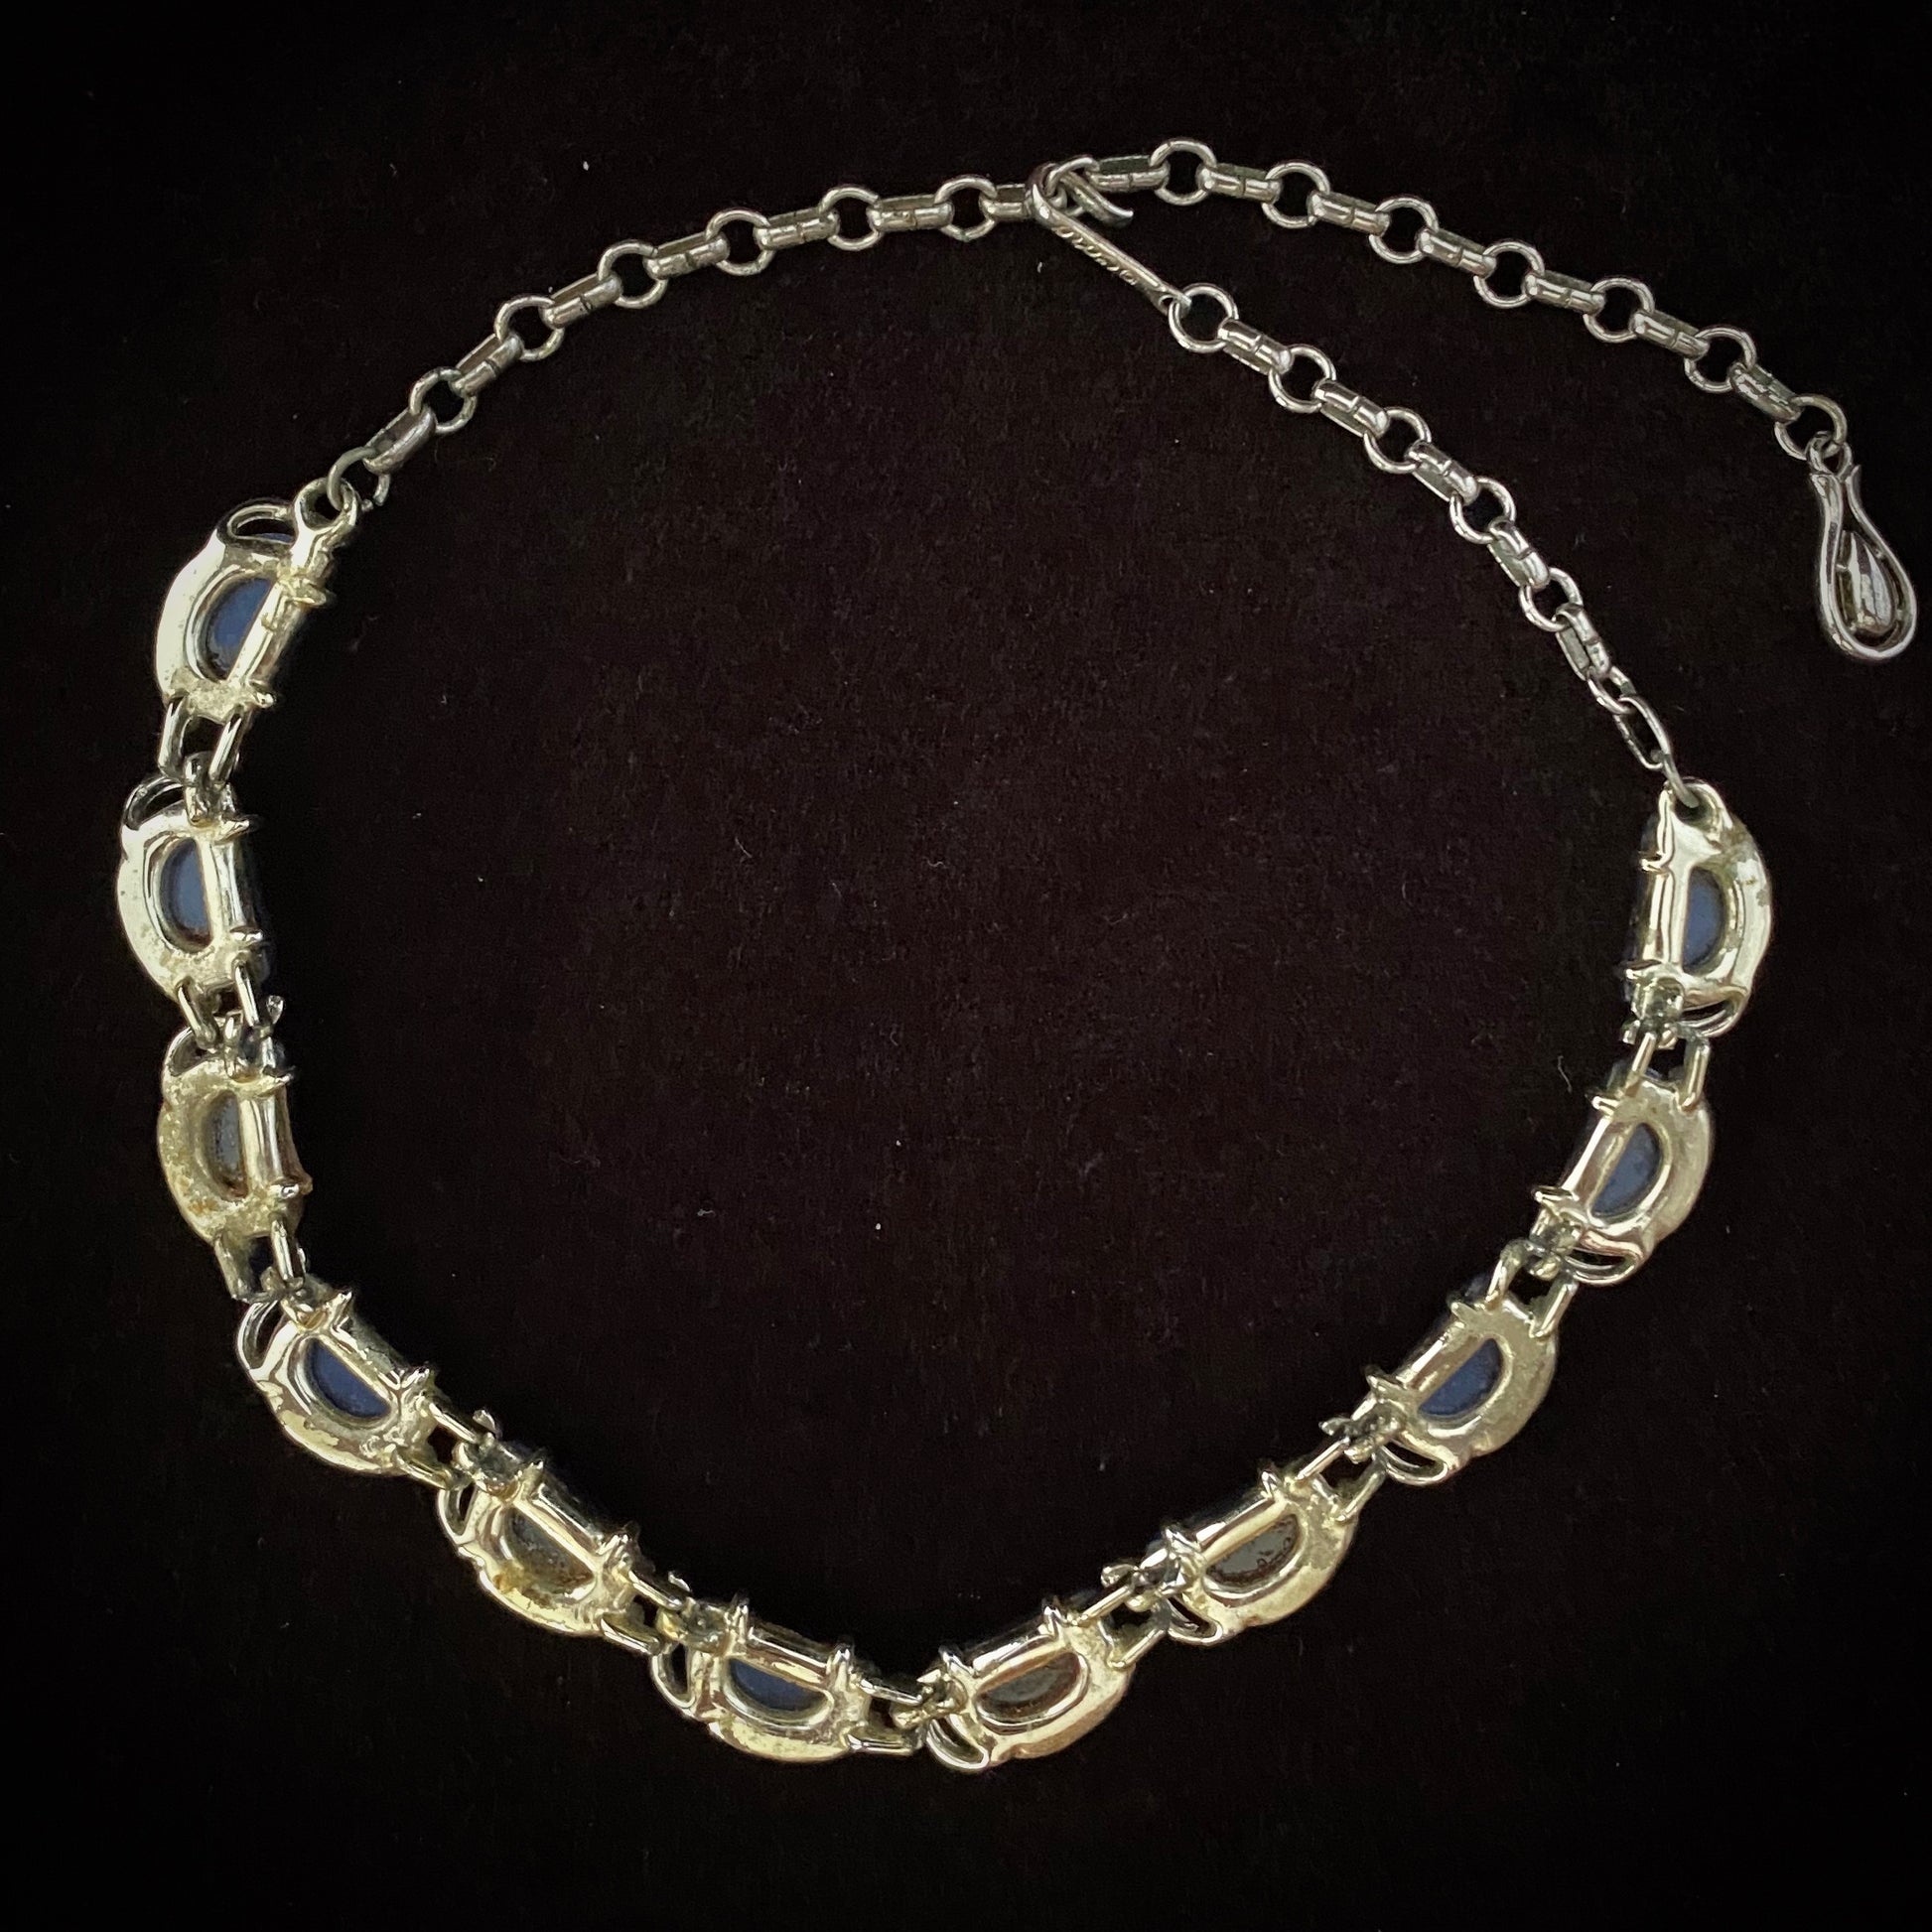 Late 50s/ Early 60s Coro Blue and Silver Necklace - Retro Kandy Vintage